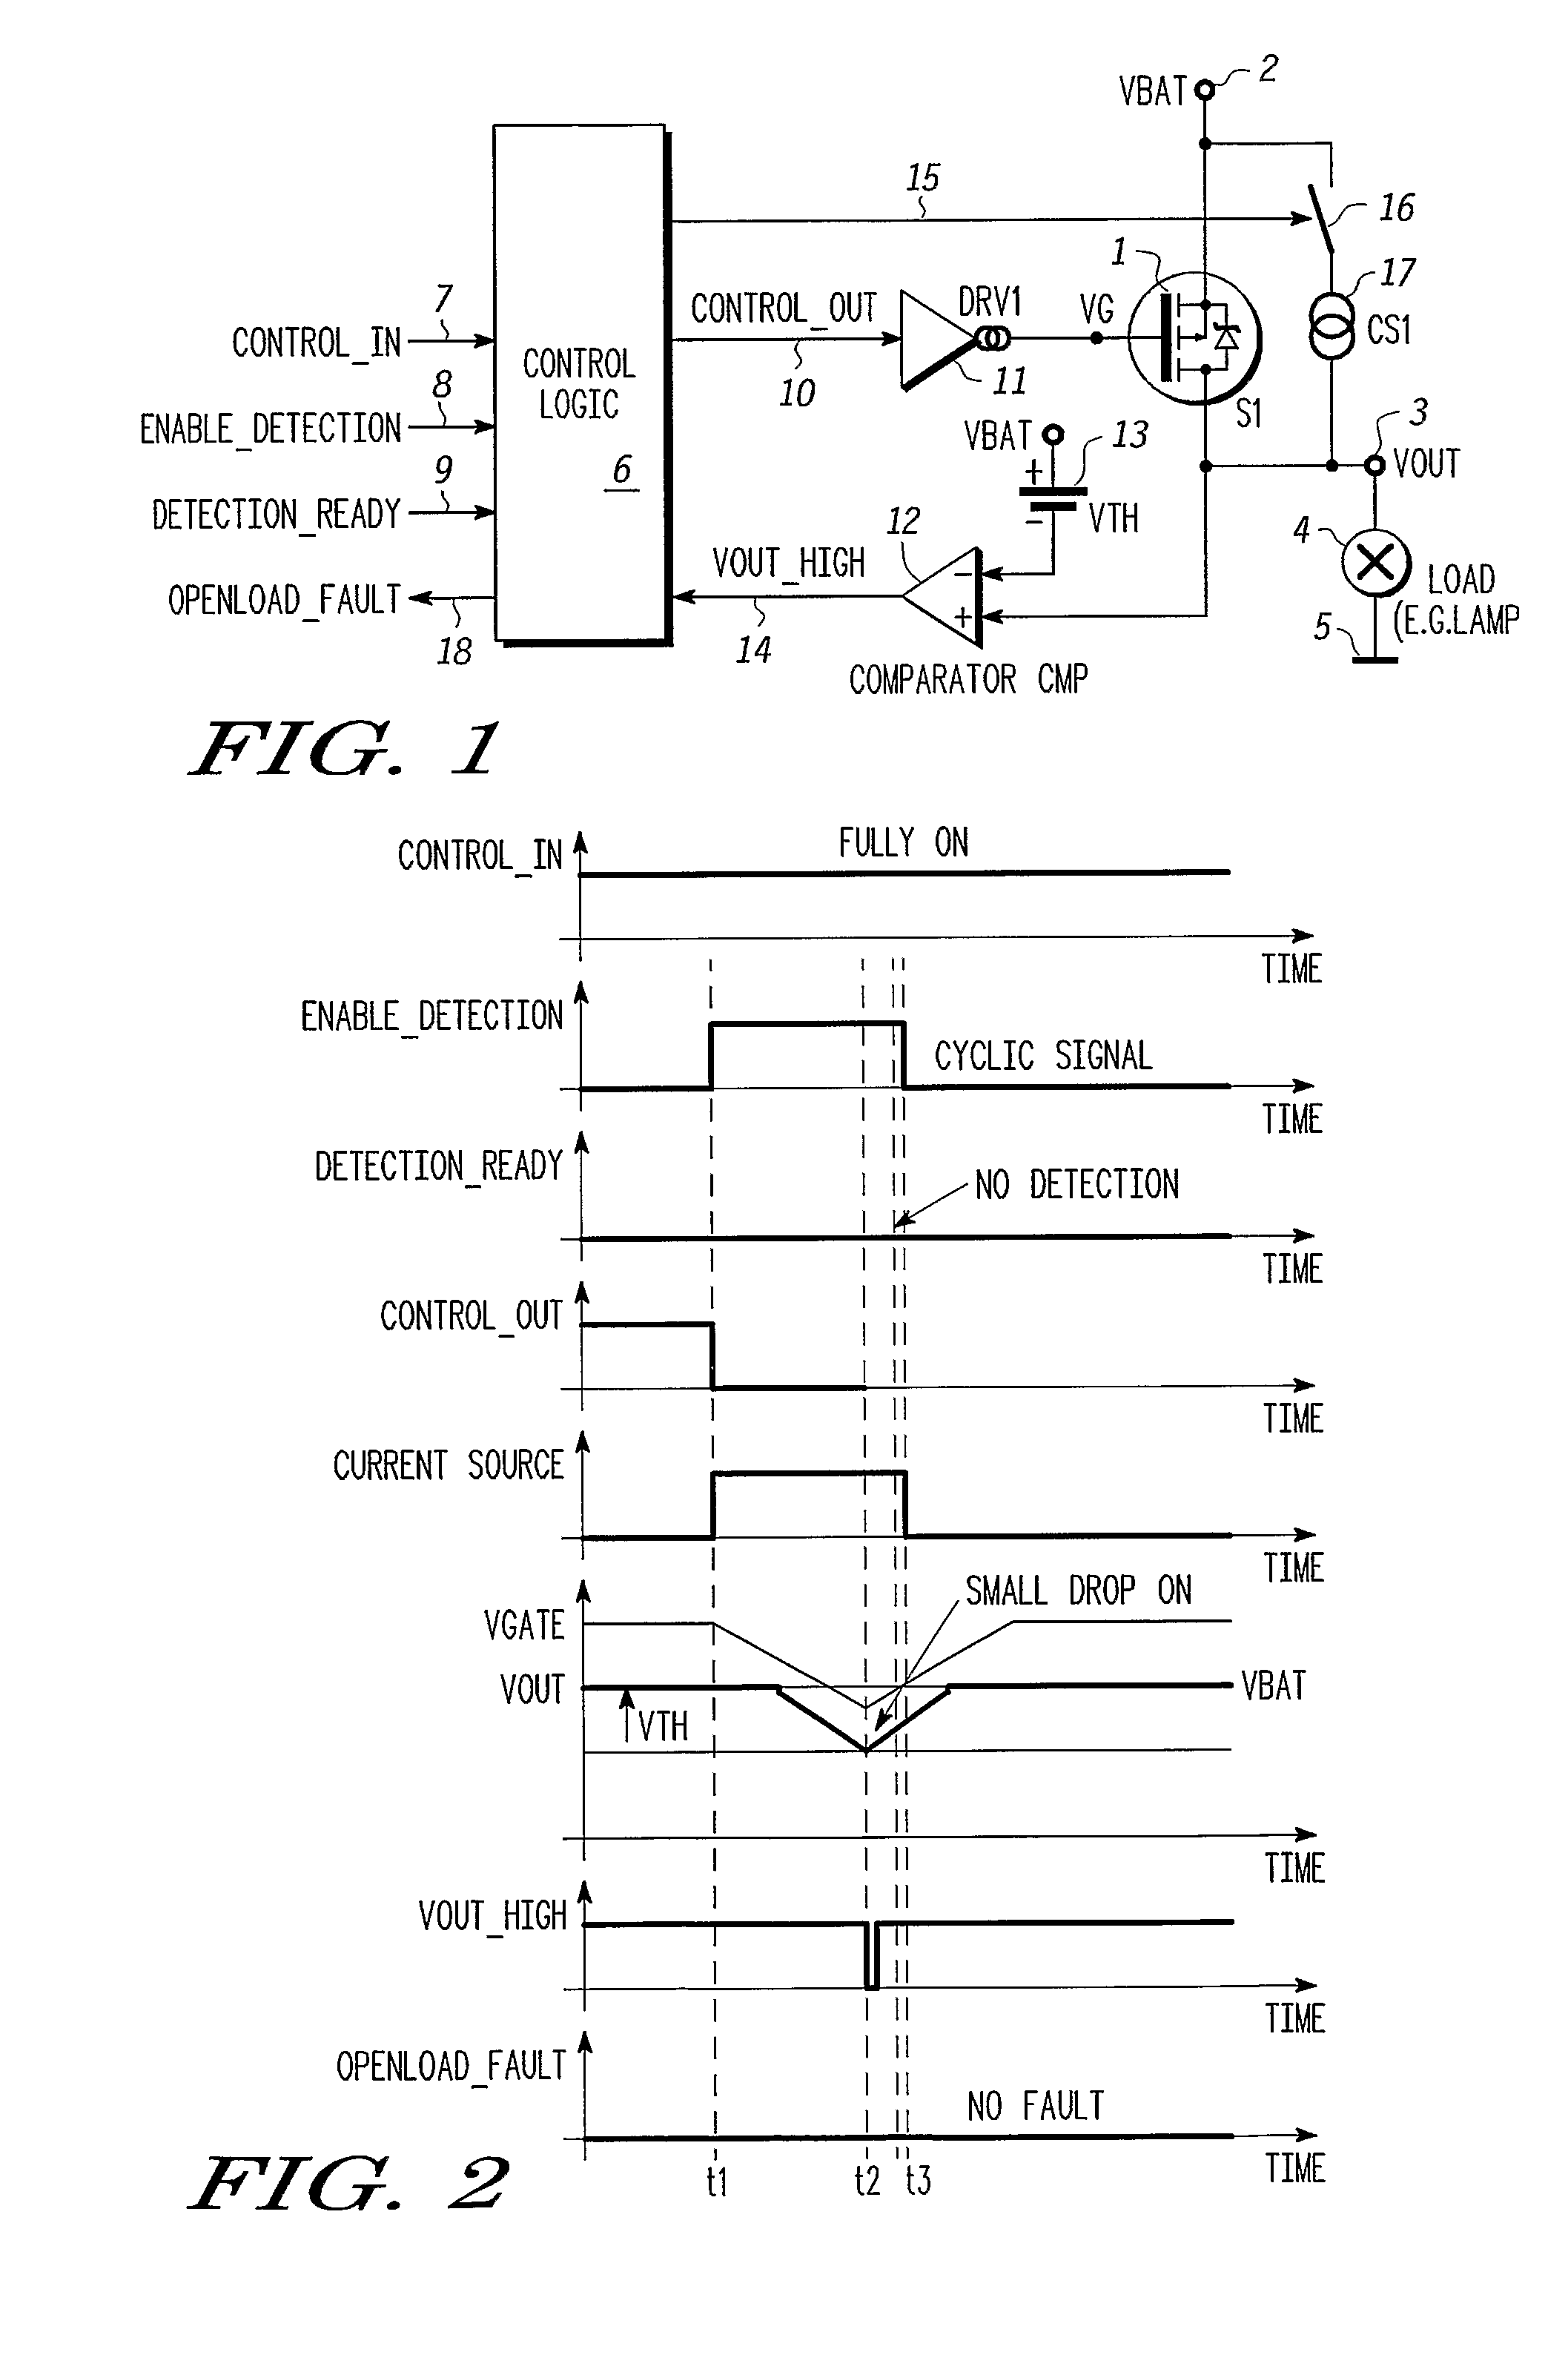 Power switching apparatus with open-load detection